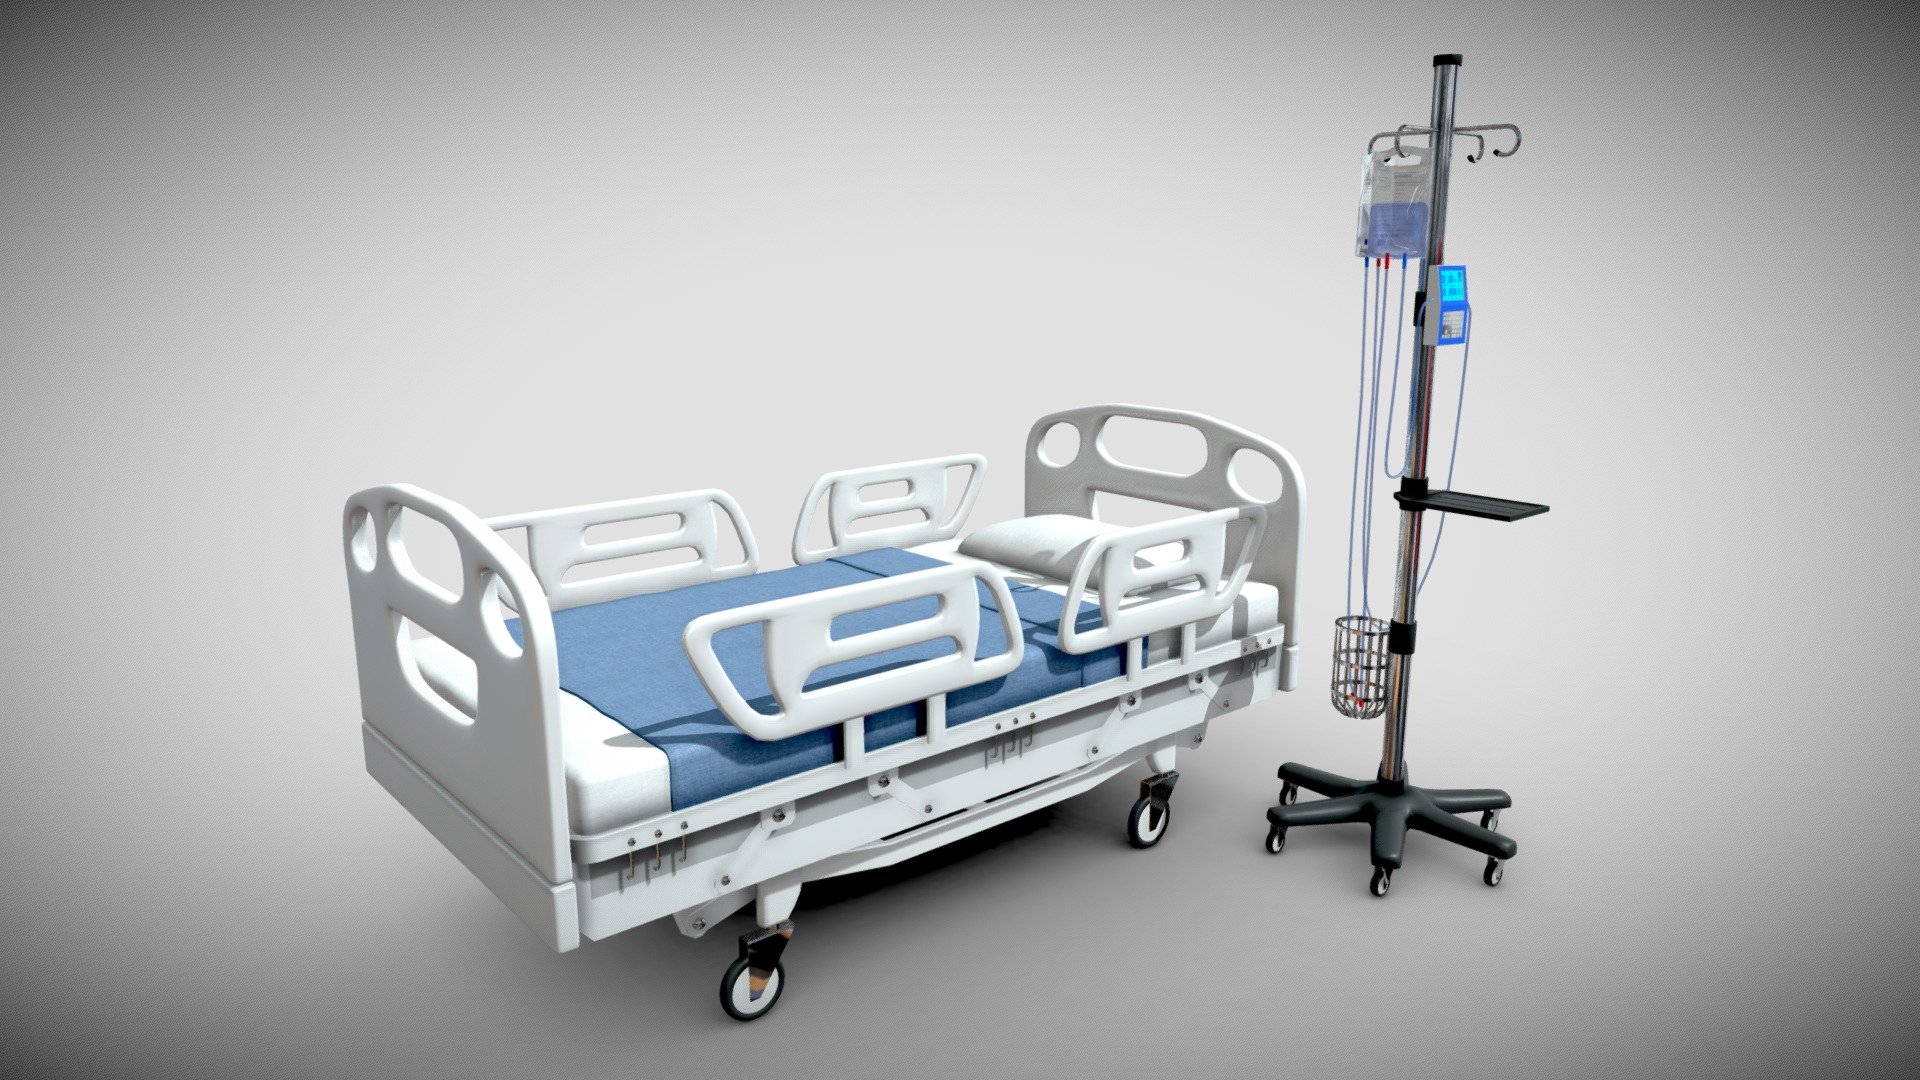 intensive care bed 3D Model 2 can be an impressive element for your projects.
low polygon, realistic image, realistic overlays, fast rendering, contains a wide variety of materials 3d model